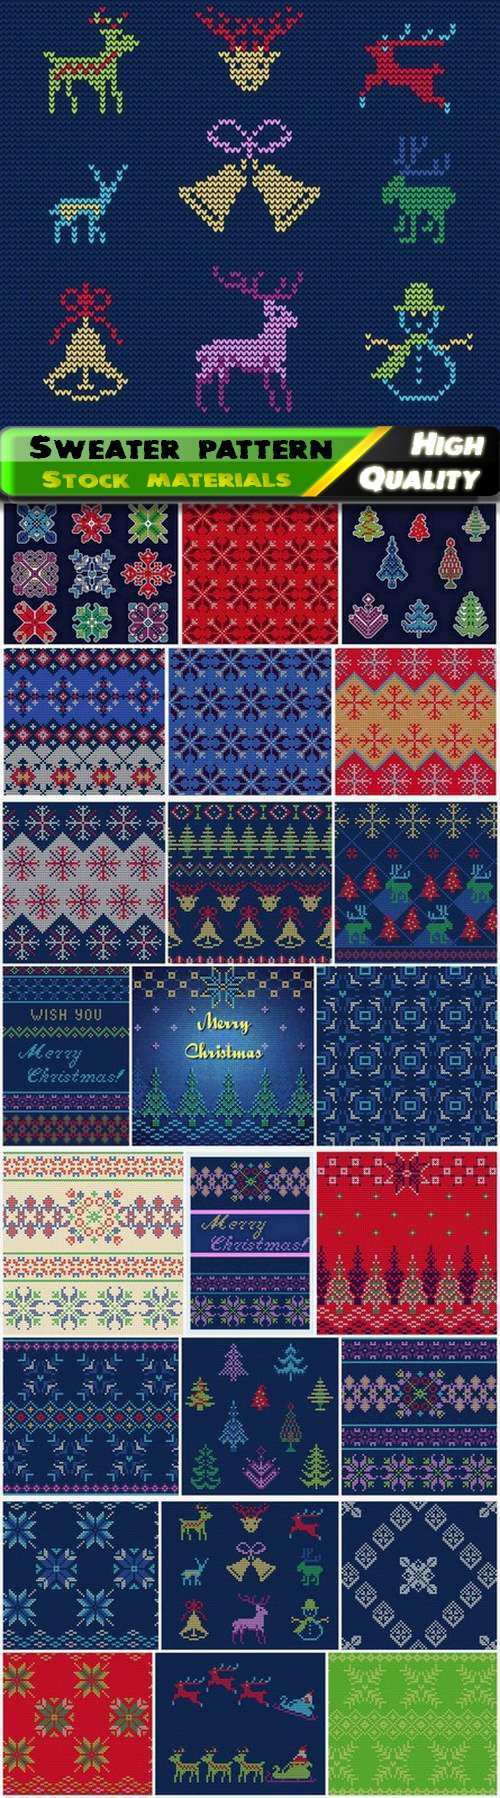 Ugly knitted sweater pattern with christmas ornament - 25 Eps